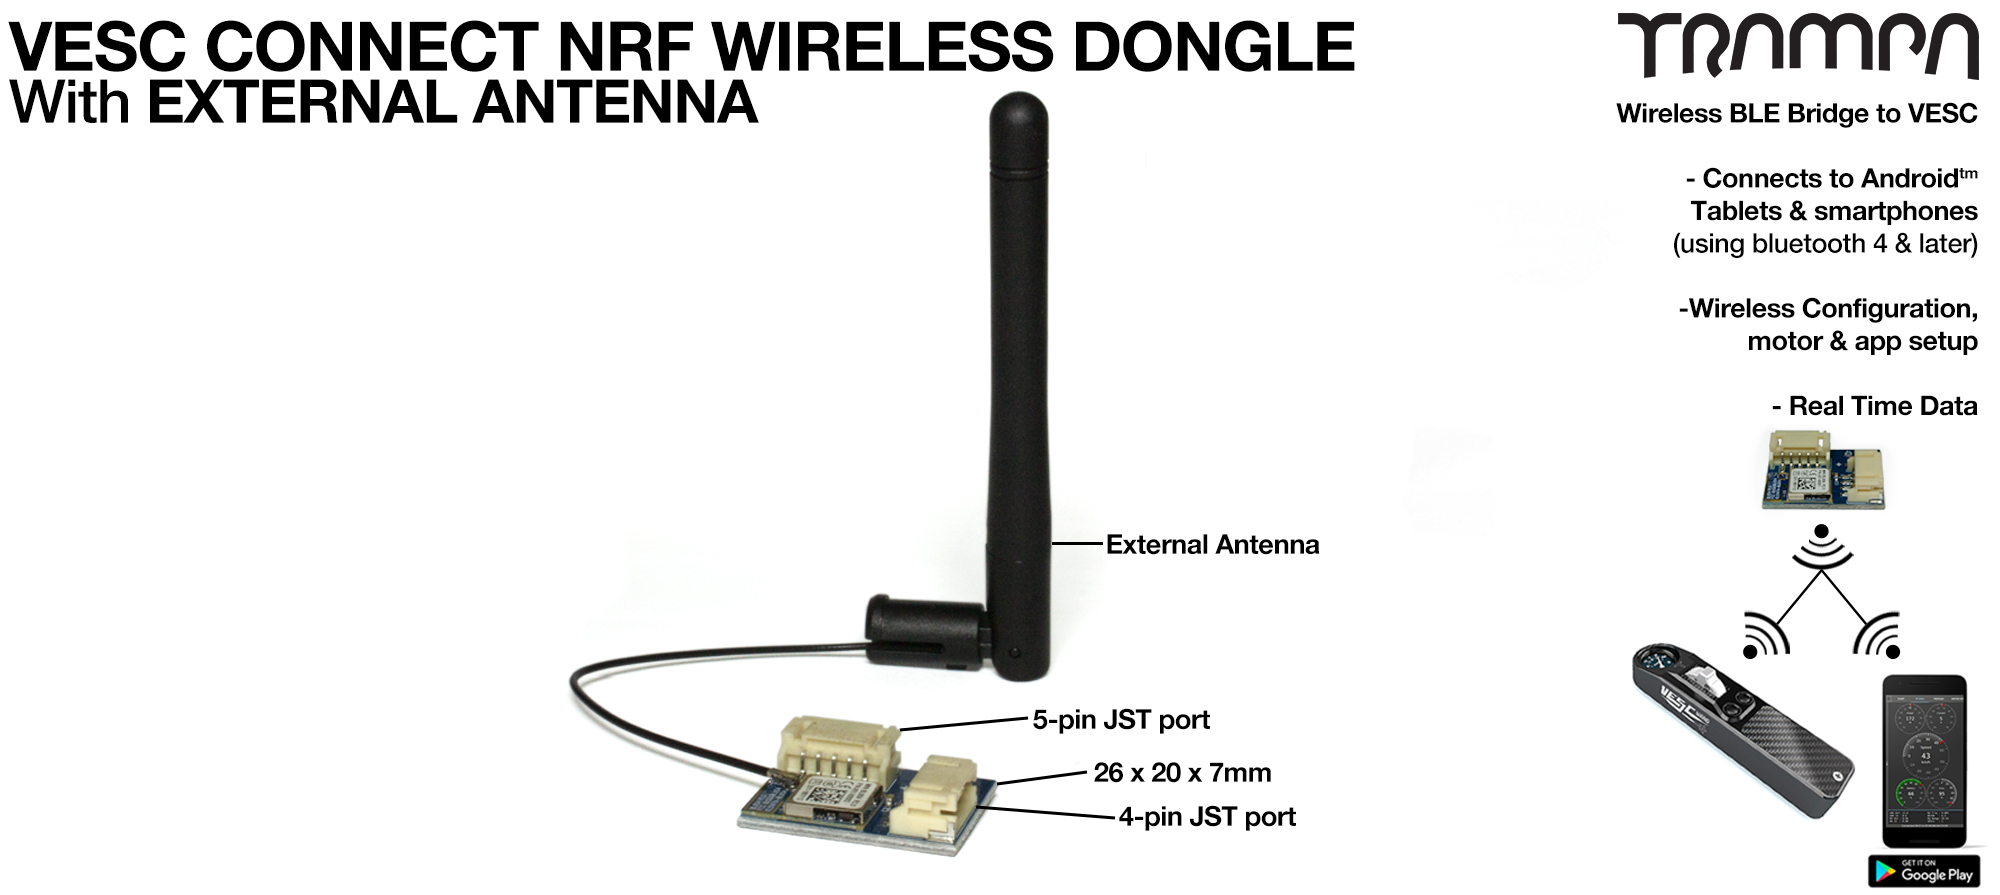 VESC Connect NRF Dongle with EXTERNAL DIPOLE Flexible Antenna 